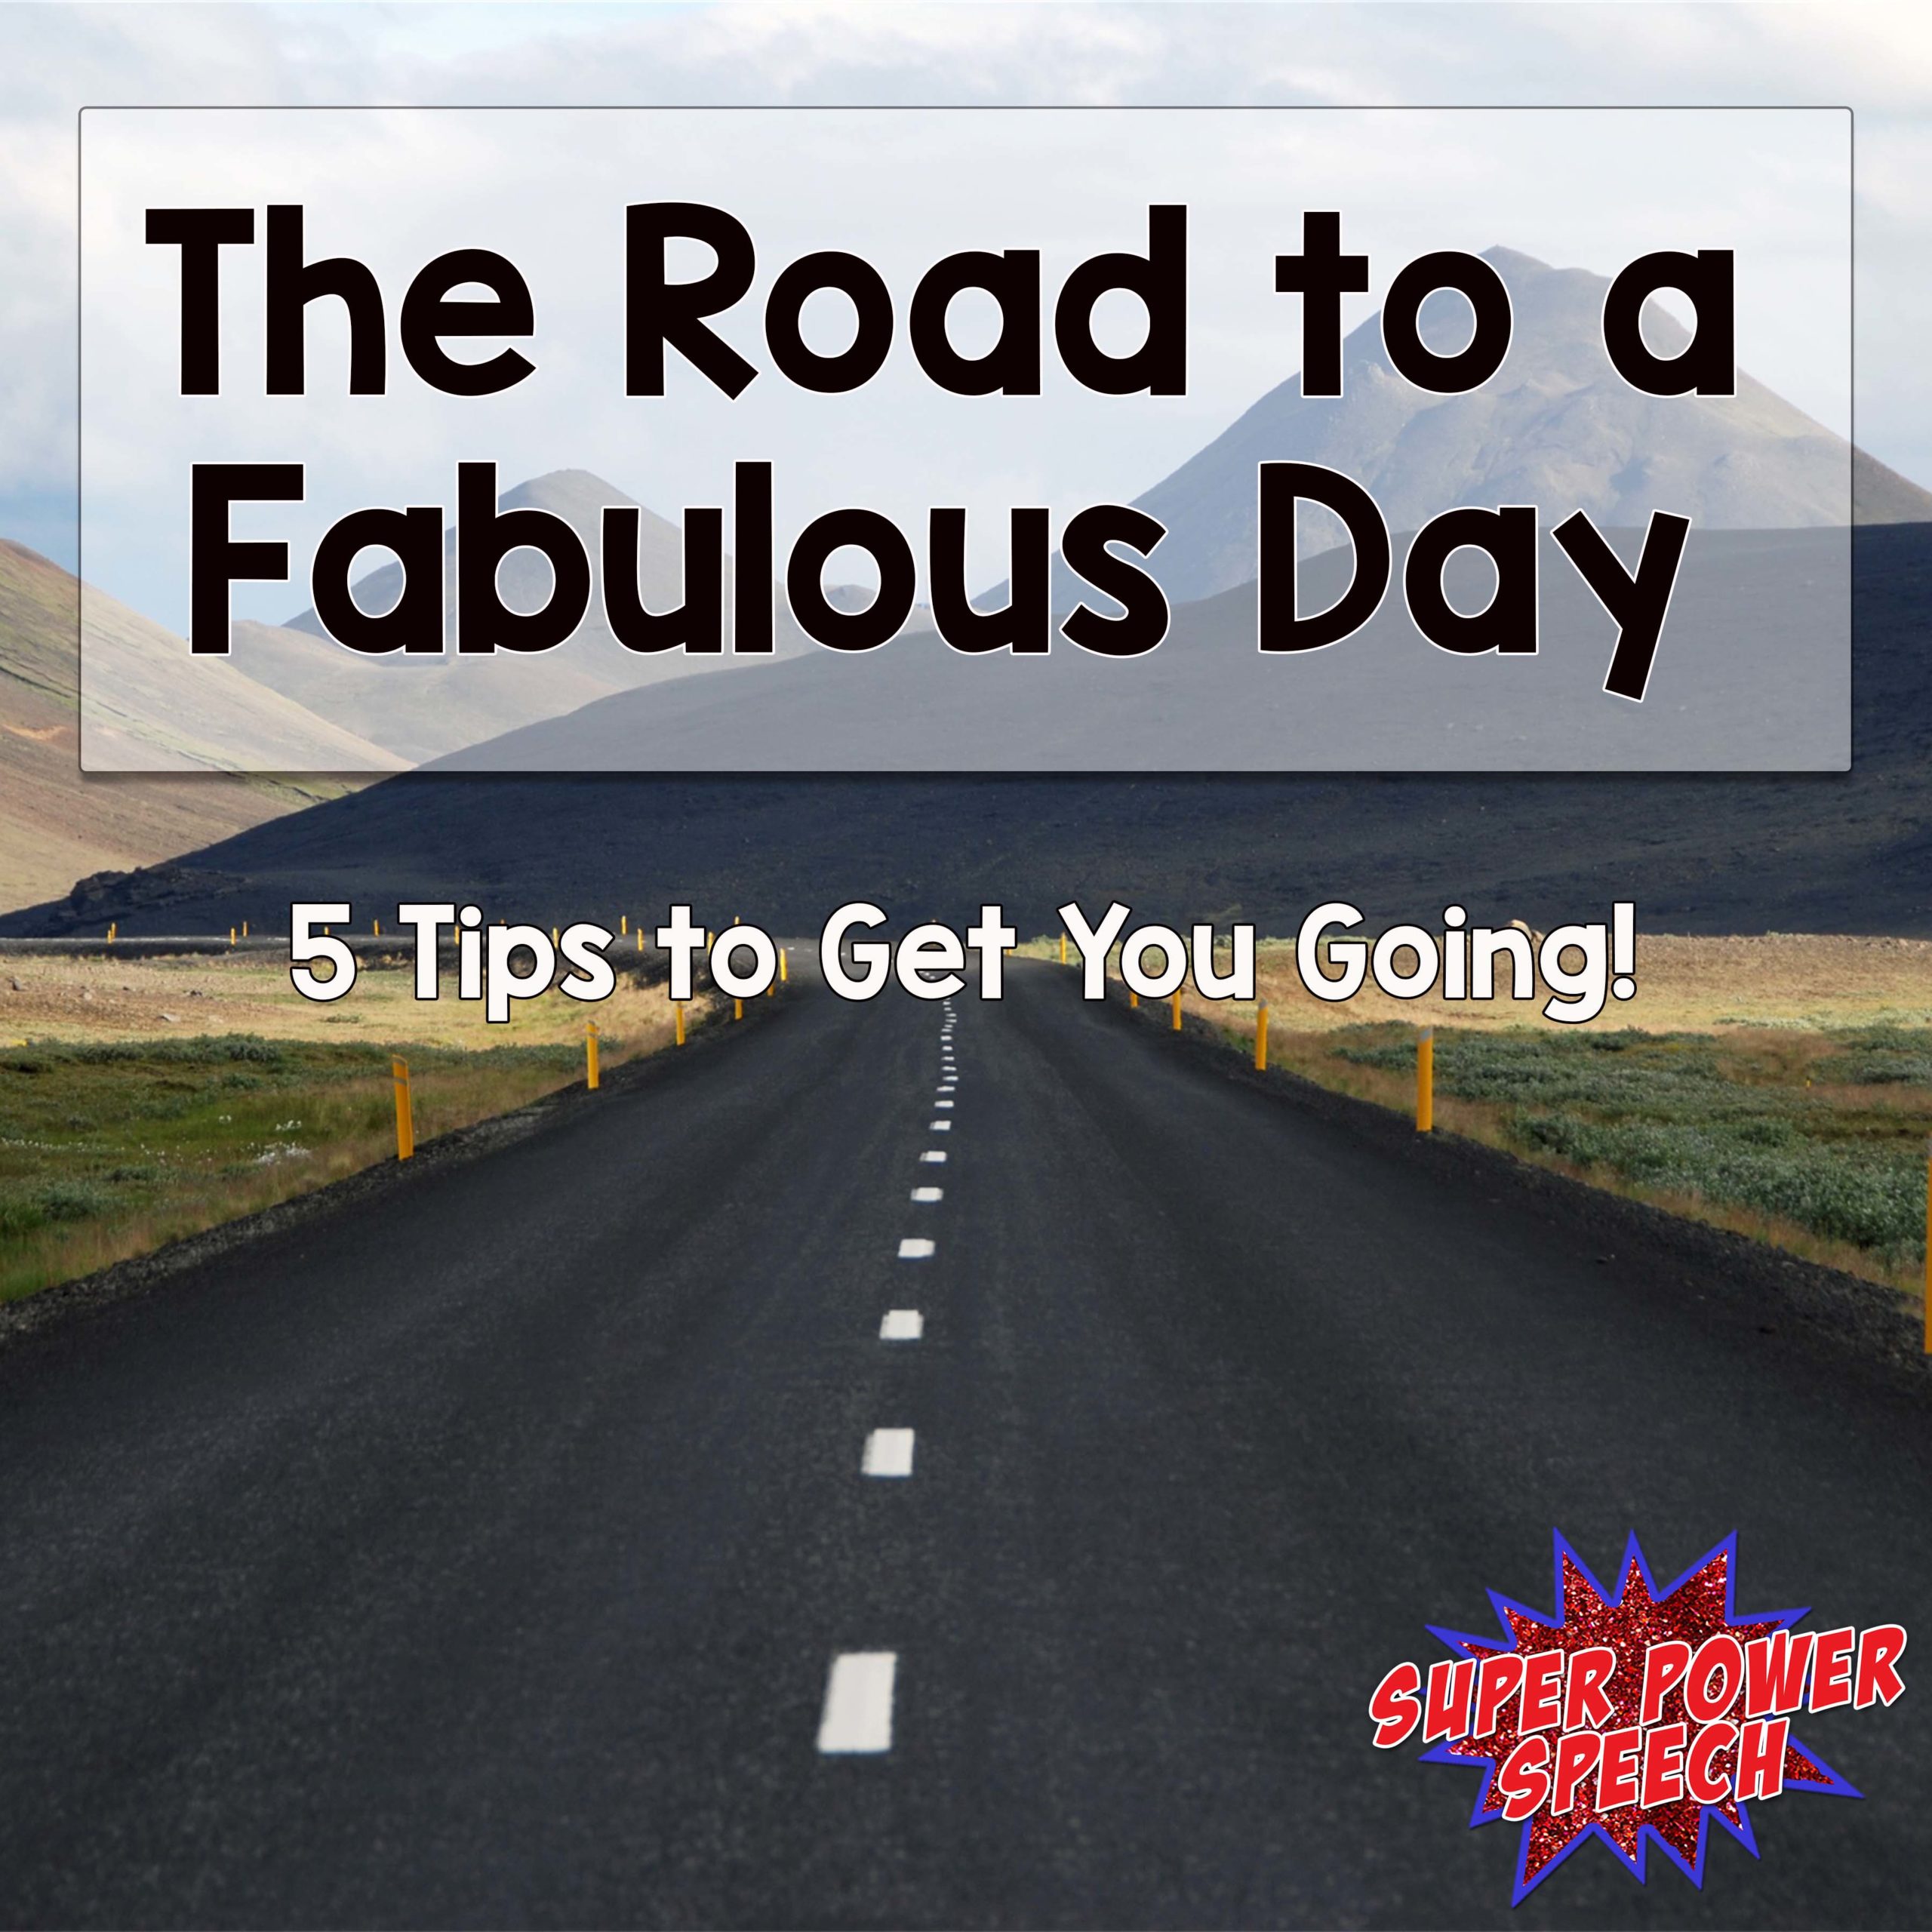 The Road to a Fabulous Day